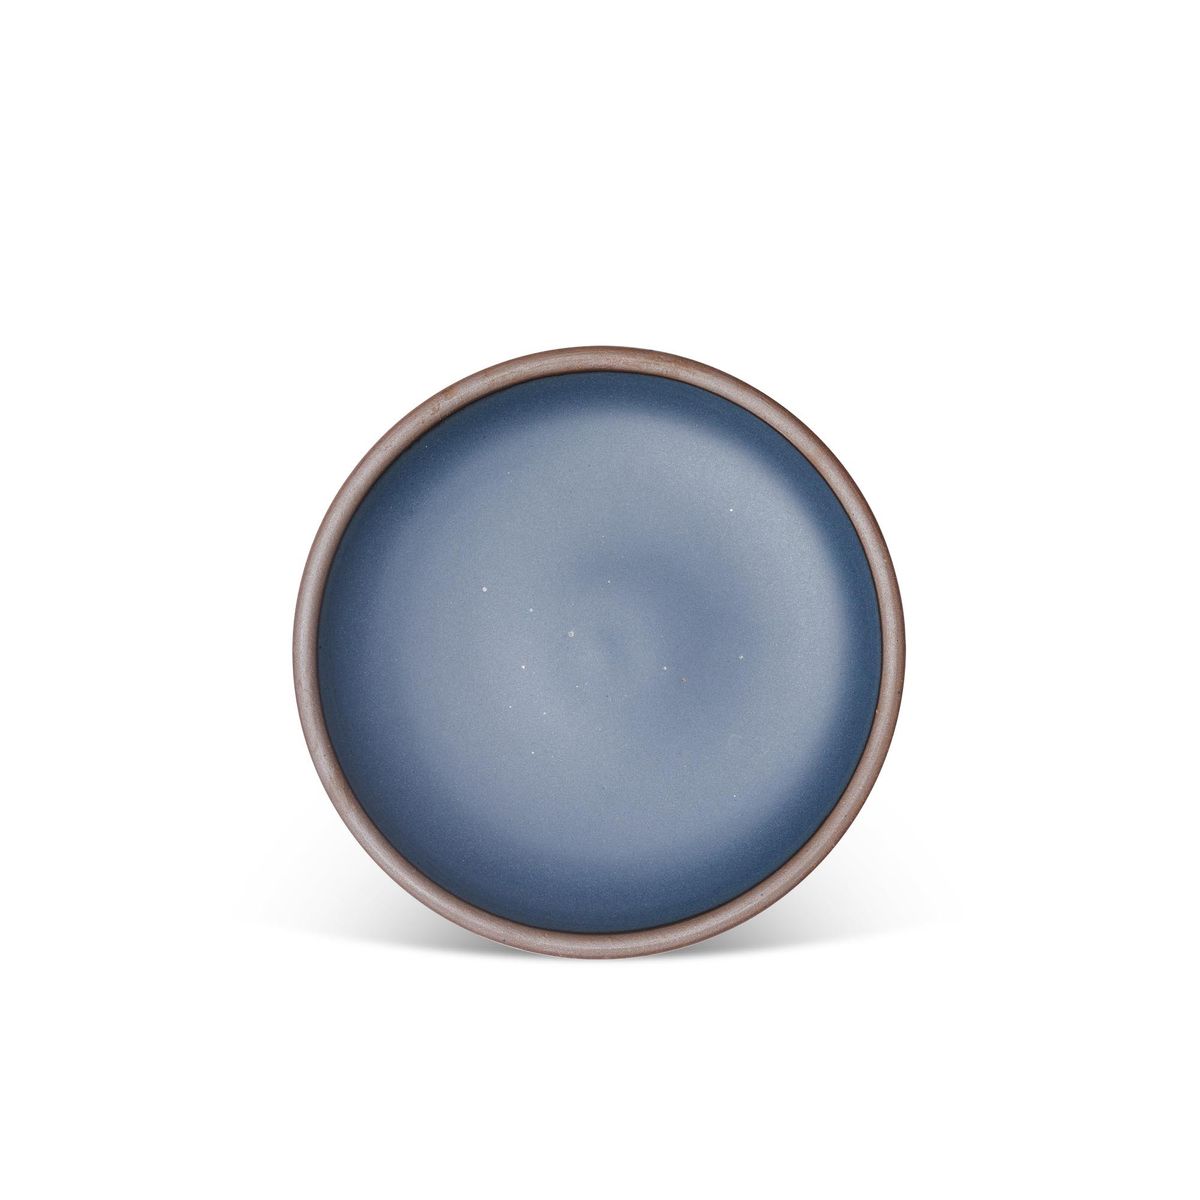 A medium sized ceramic plate in a toned-down navy color featuring iron speckles and an unglazed rim.